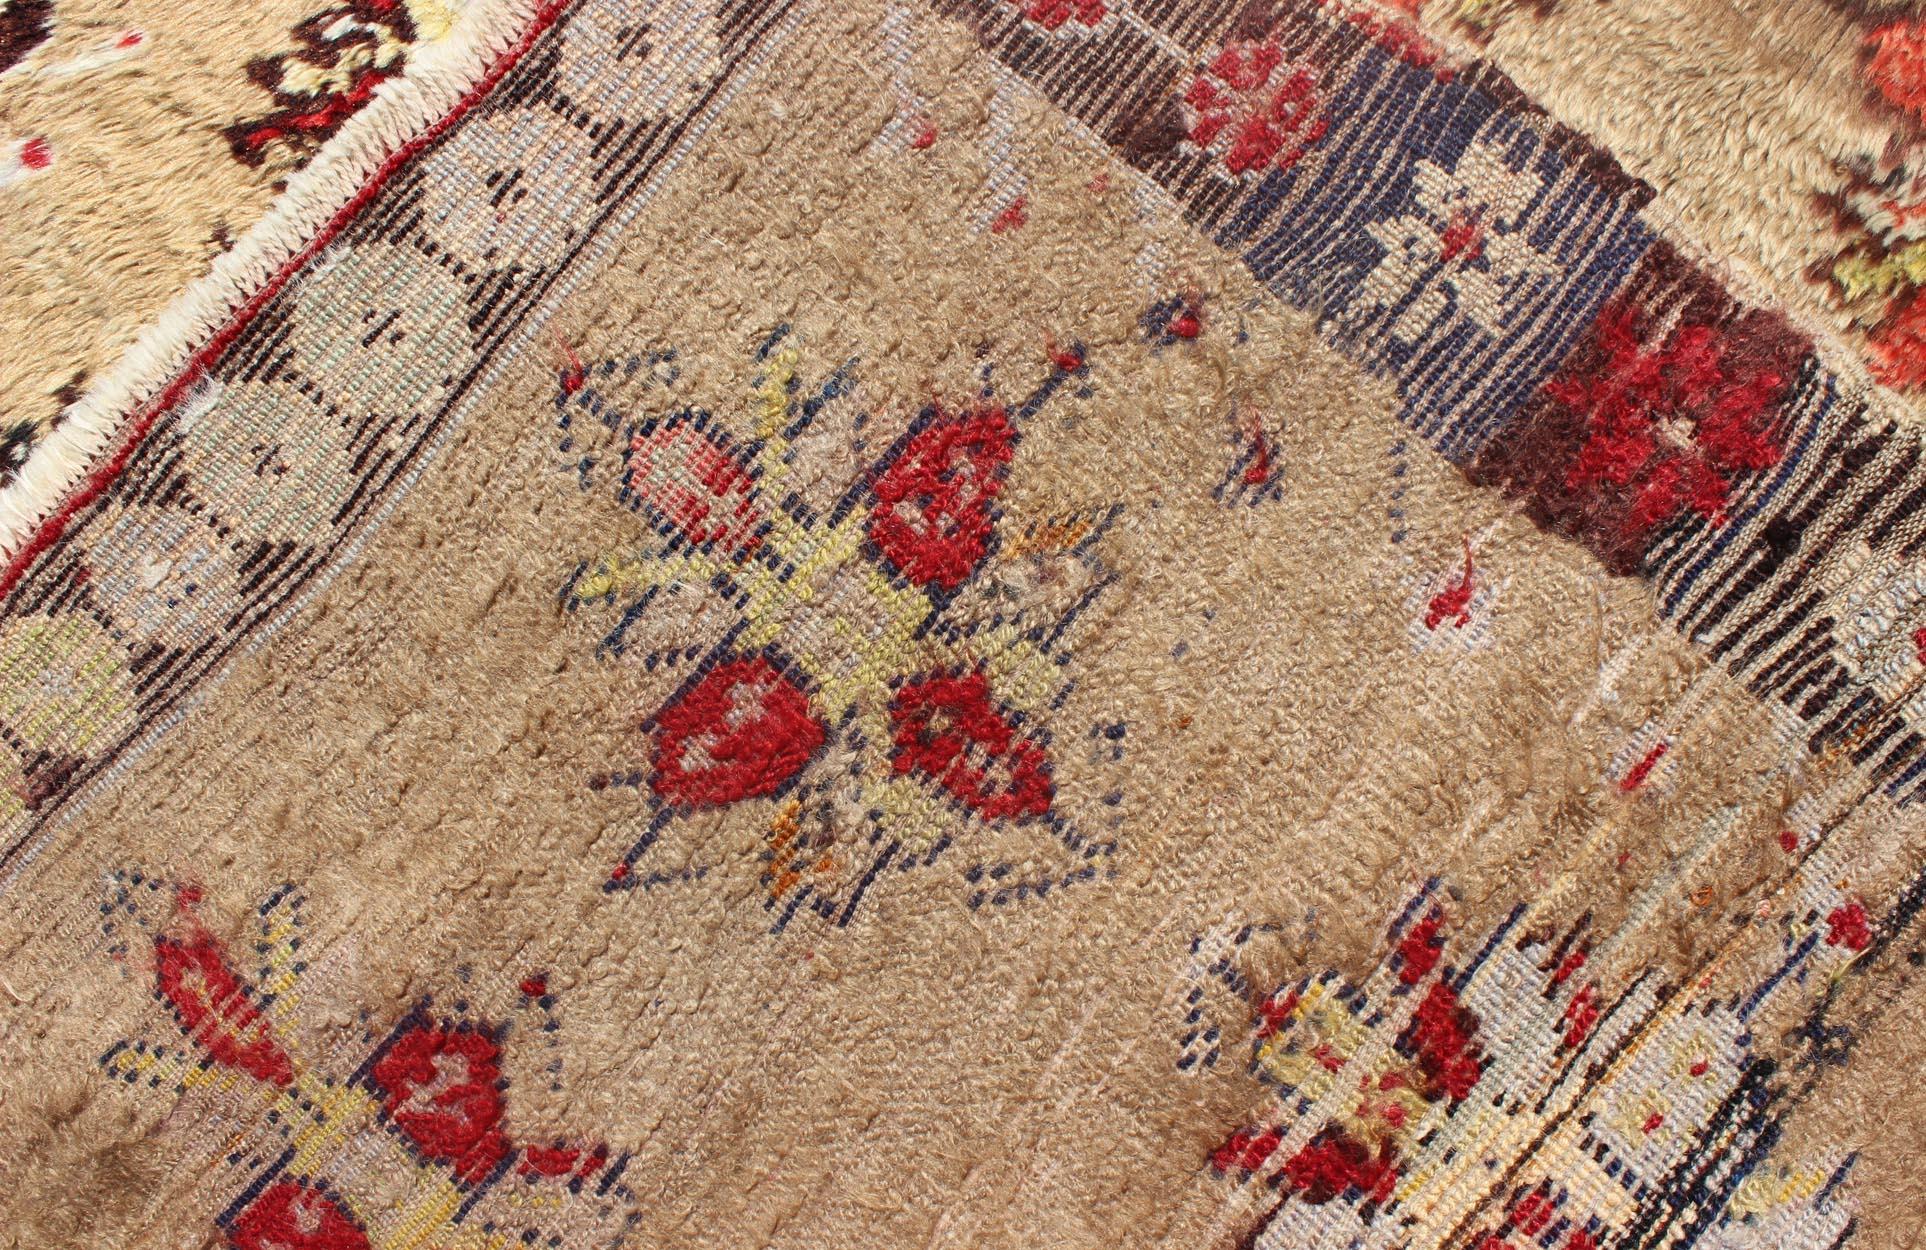 Angora Turkish Tulu Carpet with Colorful Floral Designs Set on Sand Field For Sale 6